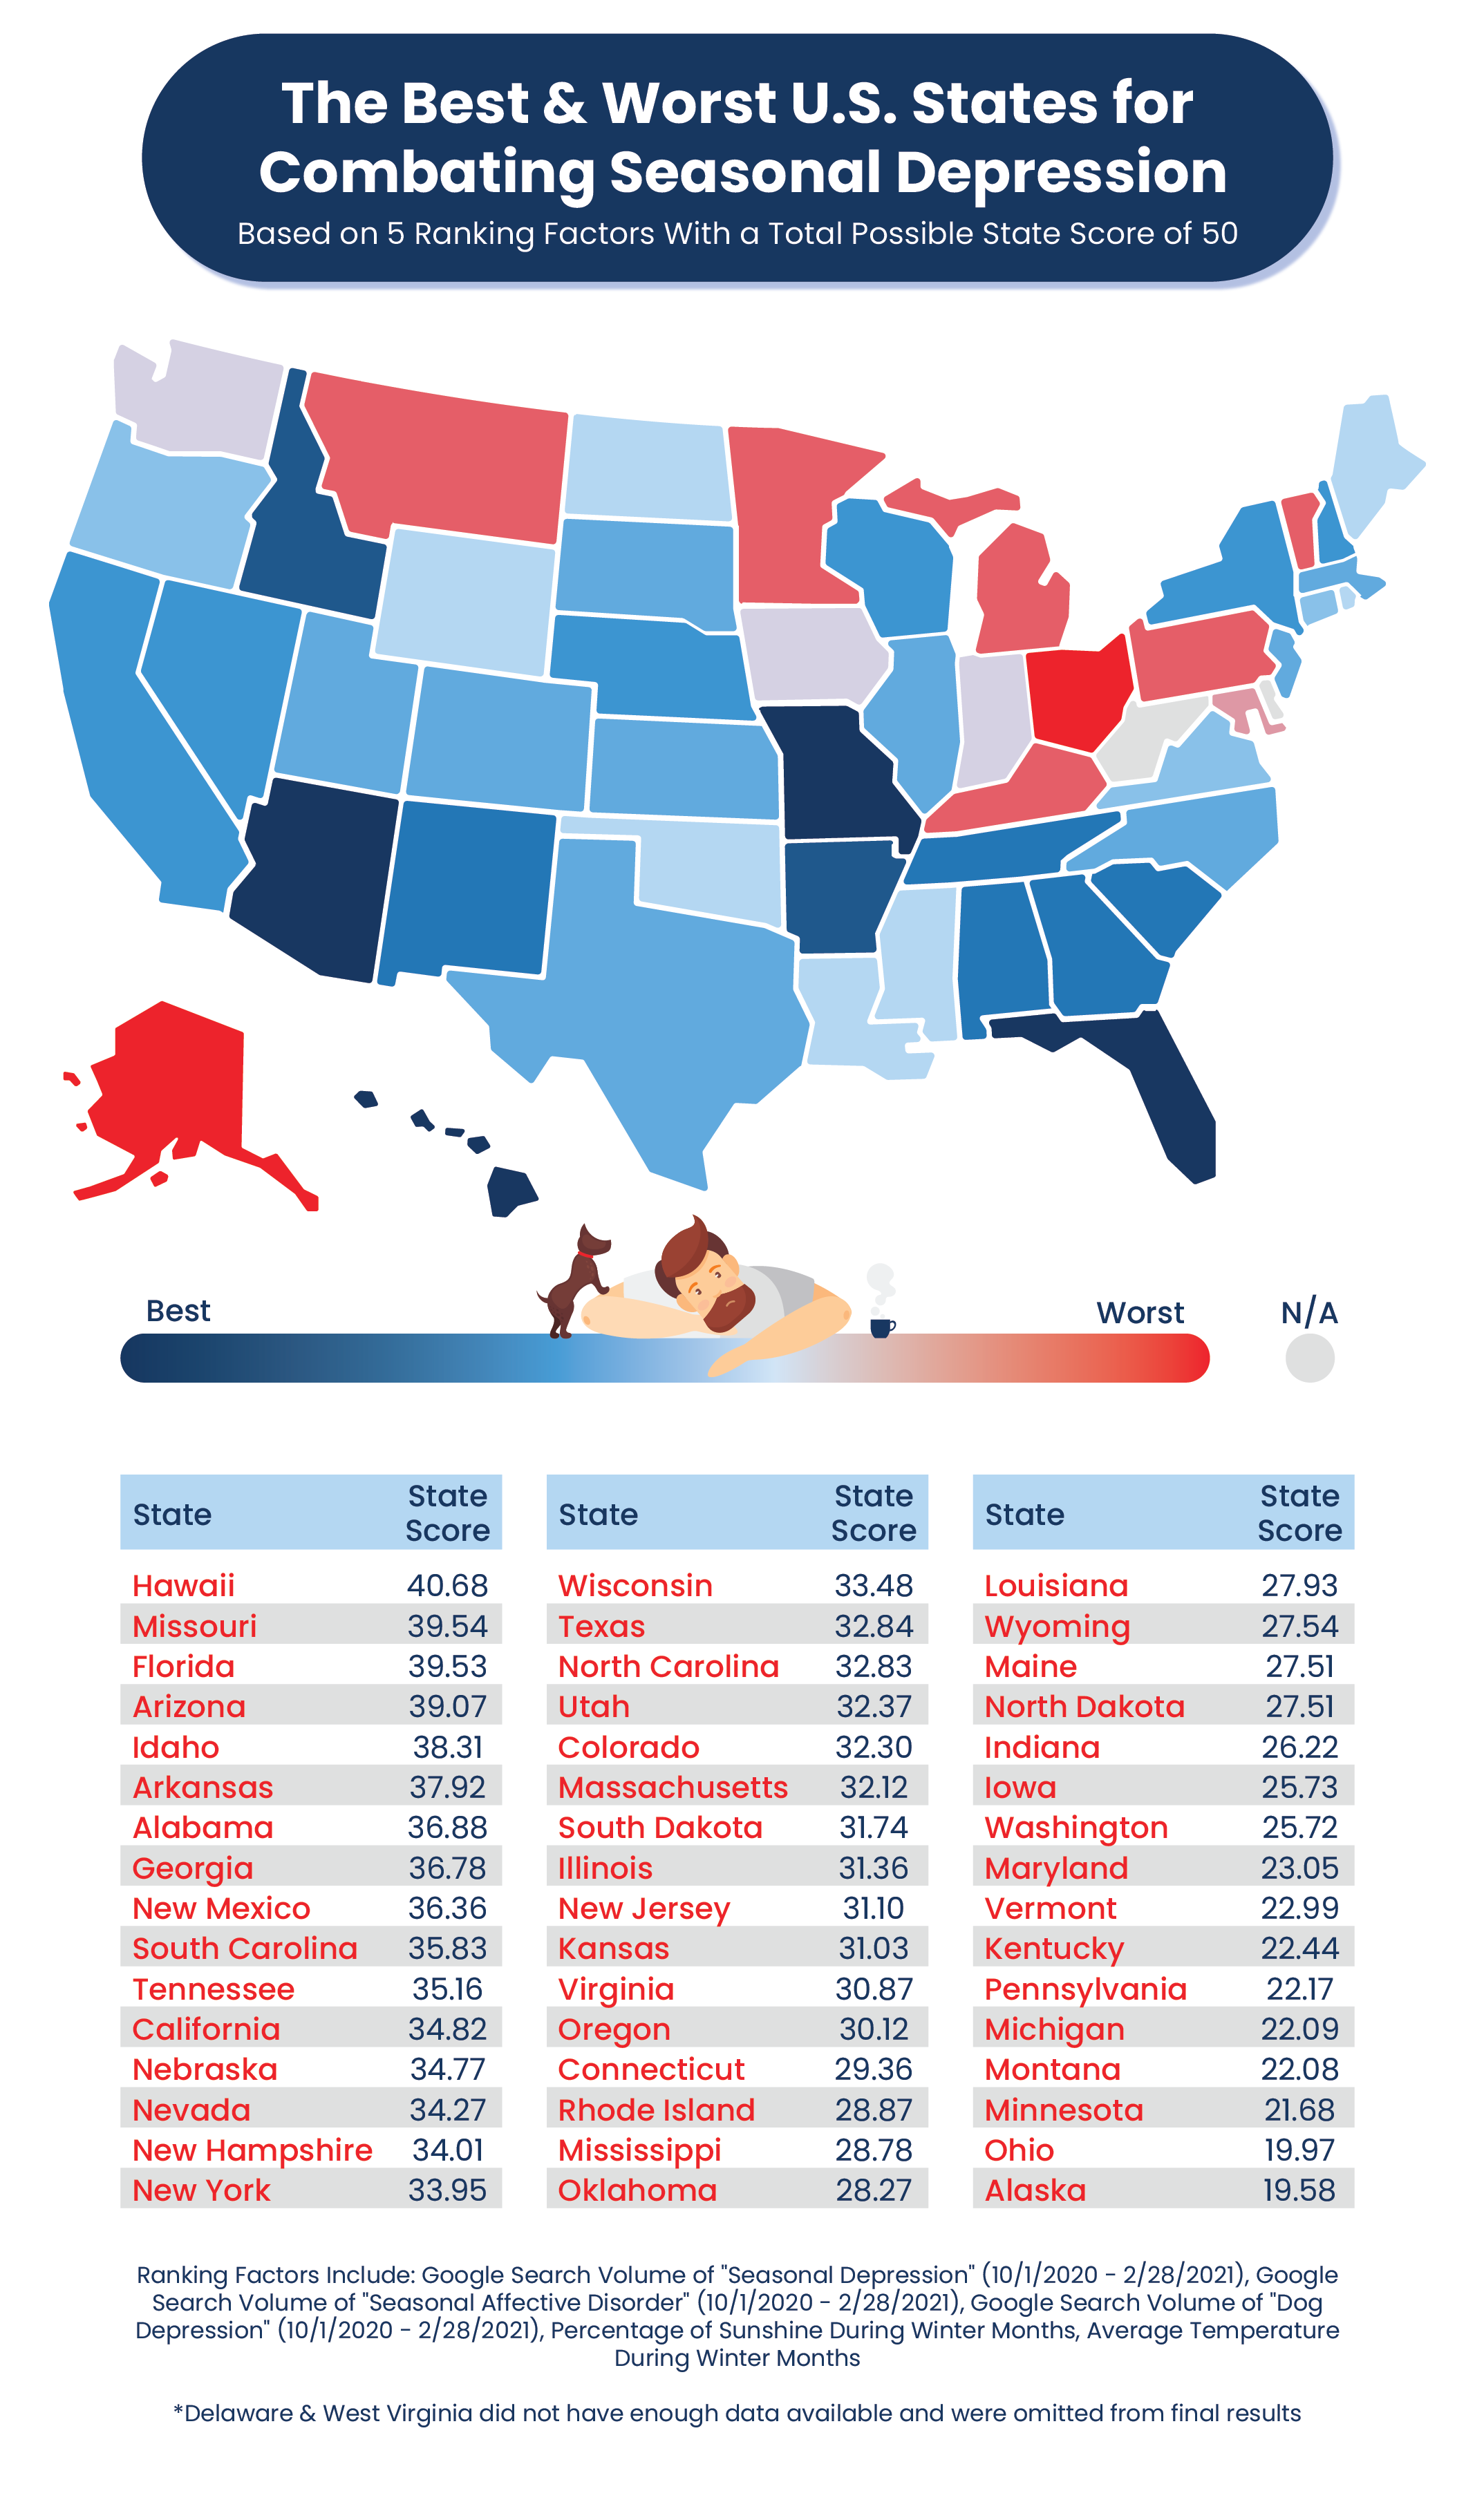 Best and Worst States for Seasonal Depression